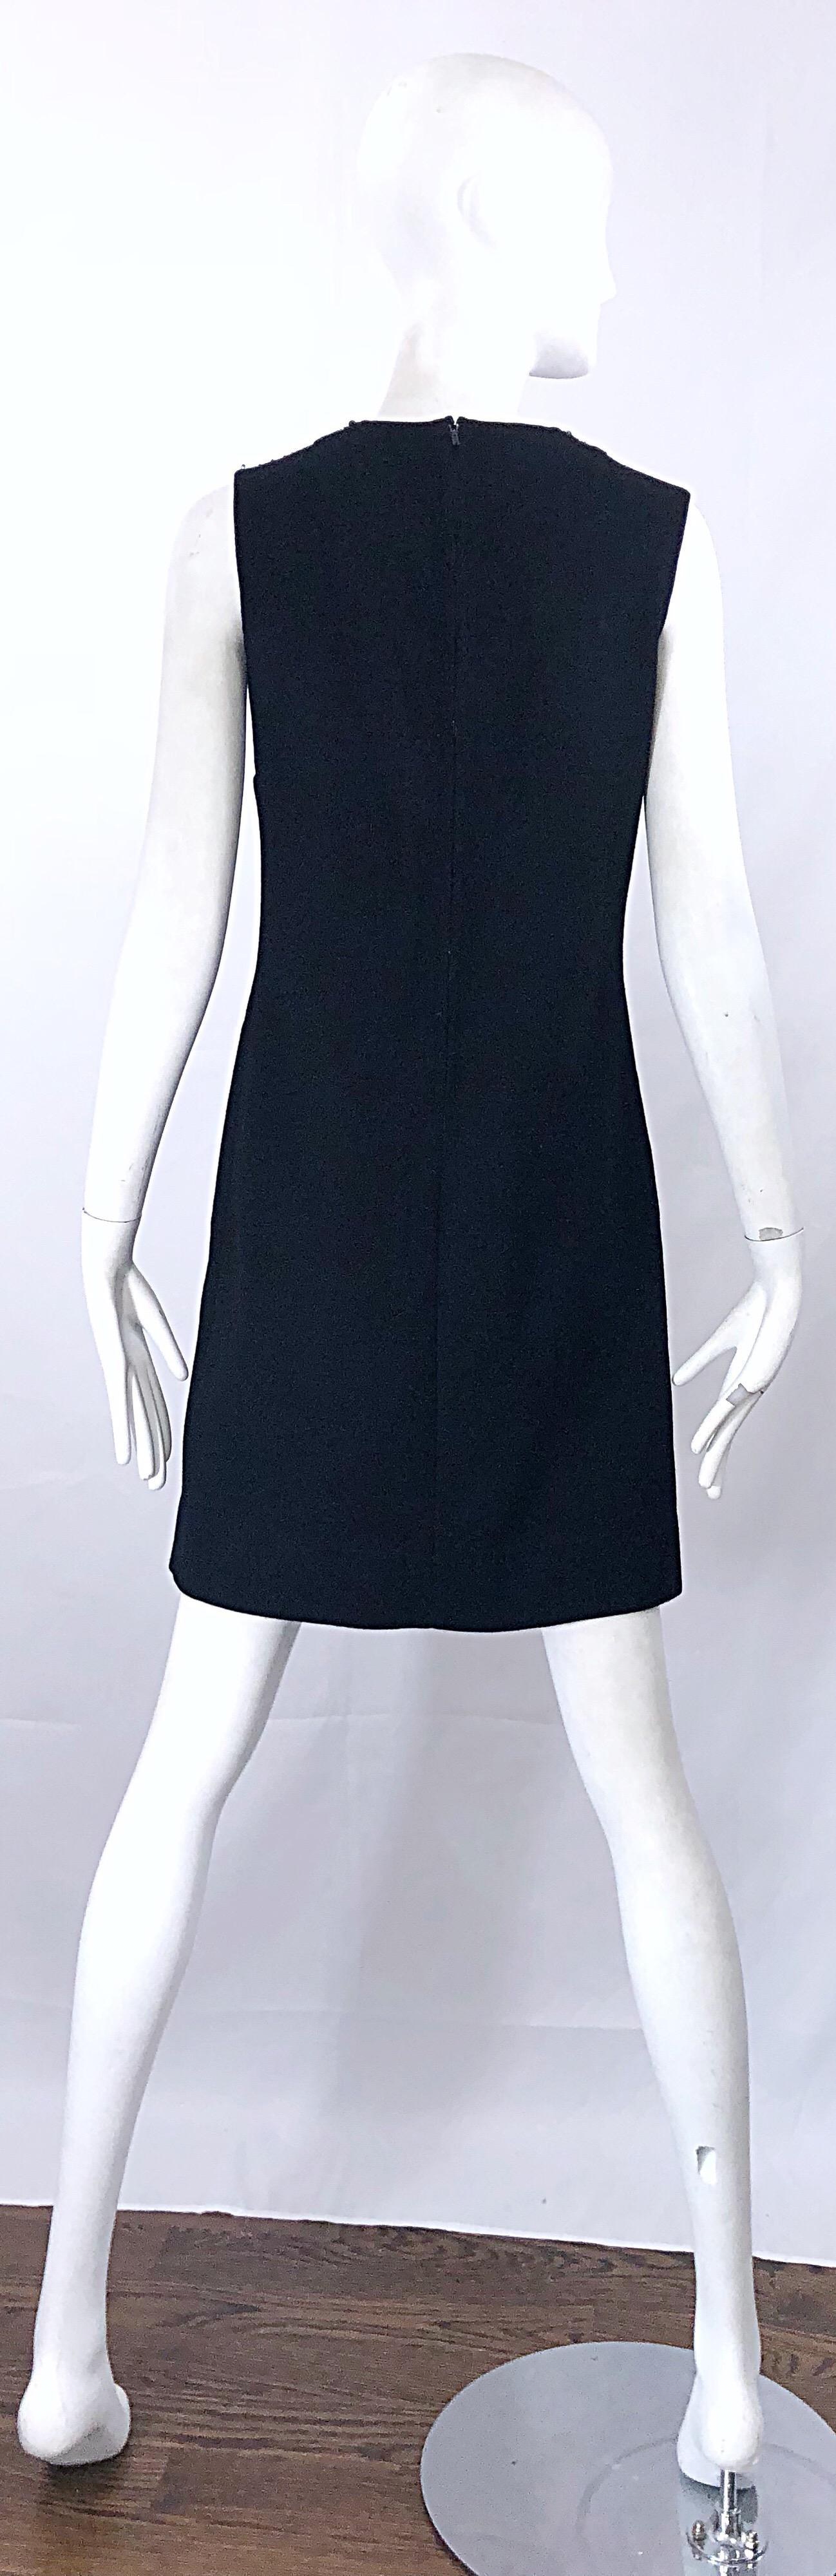 Chic 1960s St Andrews Black Zephyr Wool British Hong Kong Beaded 60s Shift Dress In Excellent Condition For Sale In San Diego, CA